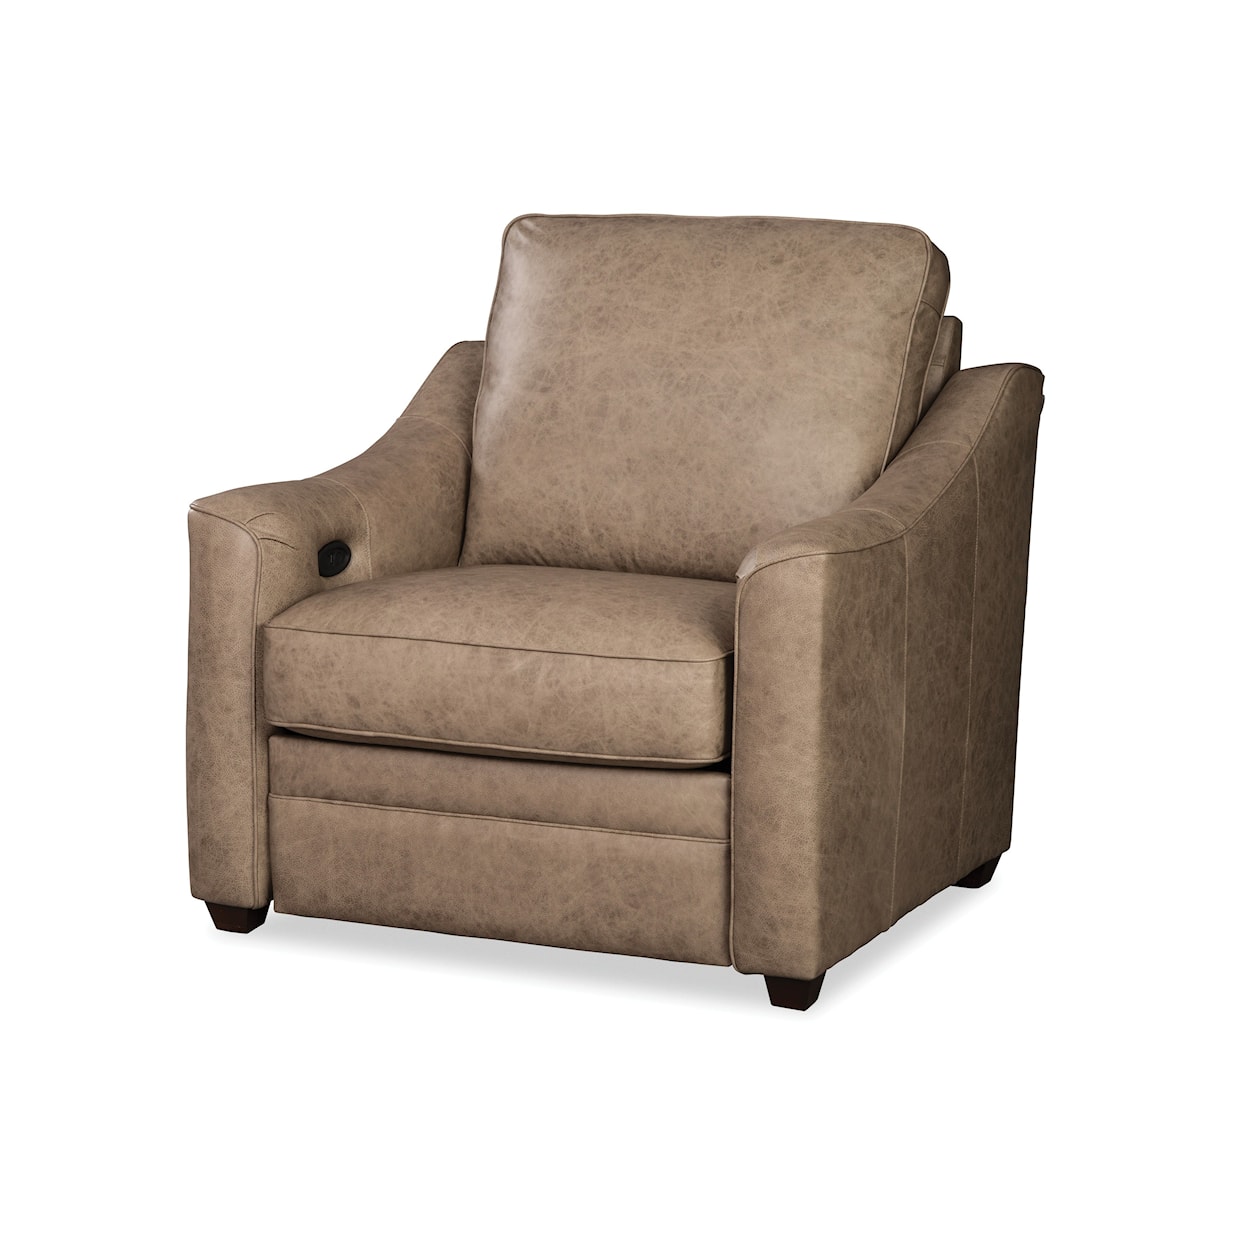 Craftmaster L9 Leather Design Options Recliner